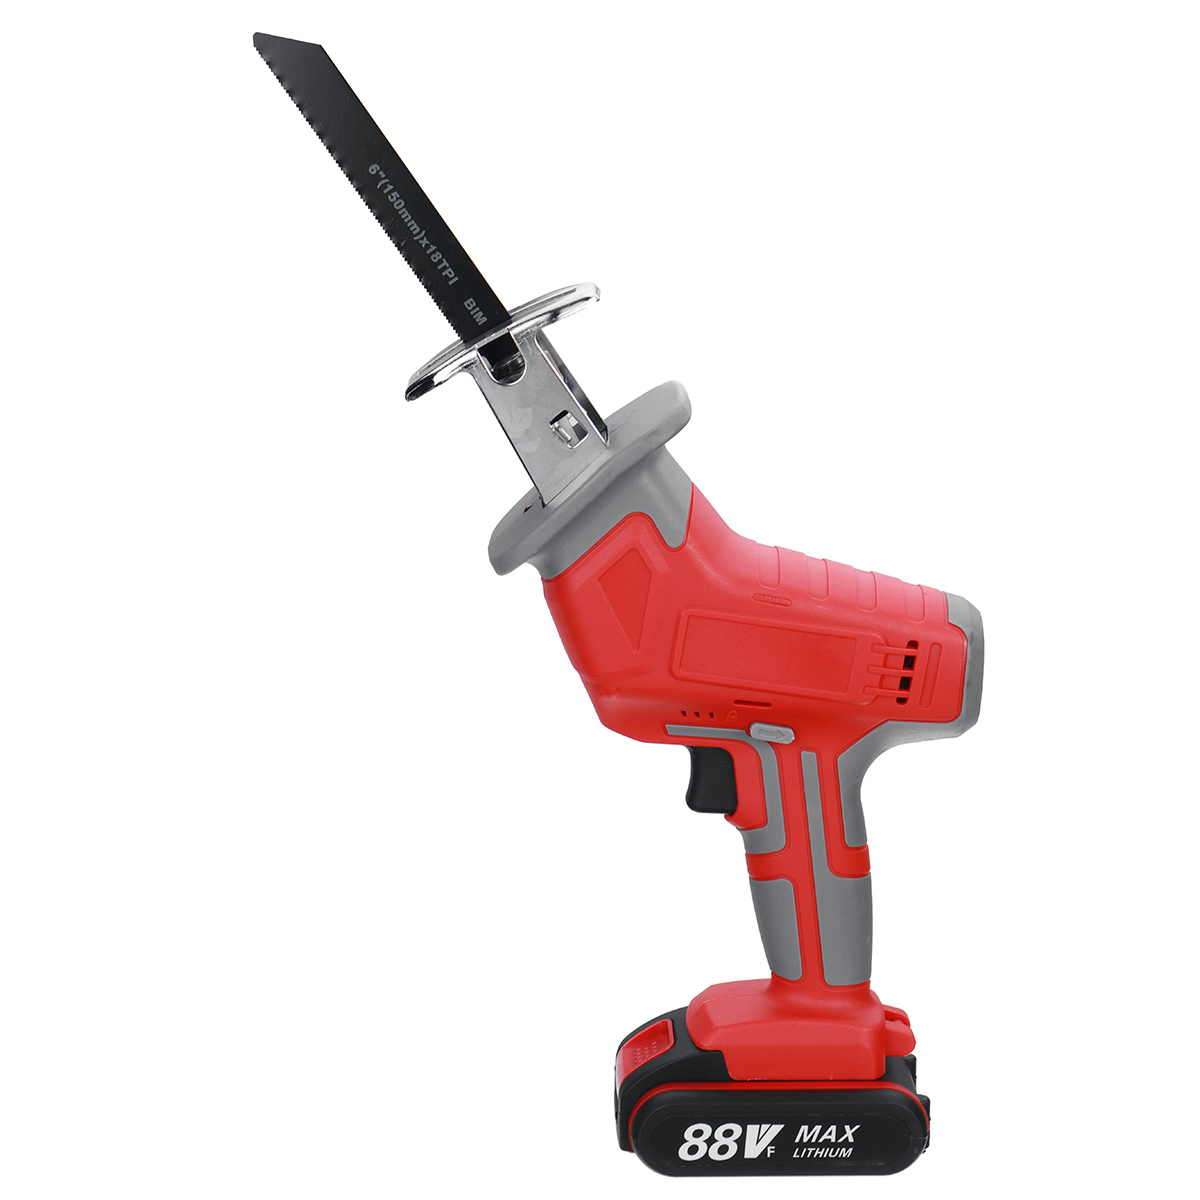 88VF-3000RPM-Rechargeable-Electric-Saw-Branches-Metal-Wood-Sawing-Cutting-Tool-1765732-4